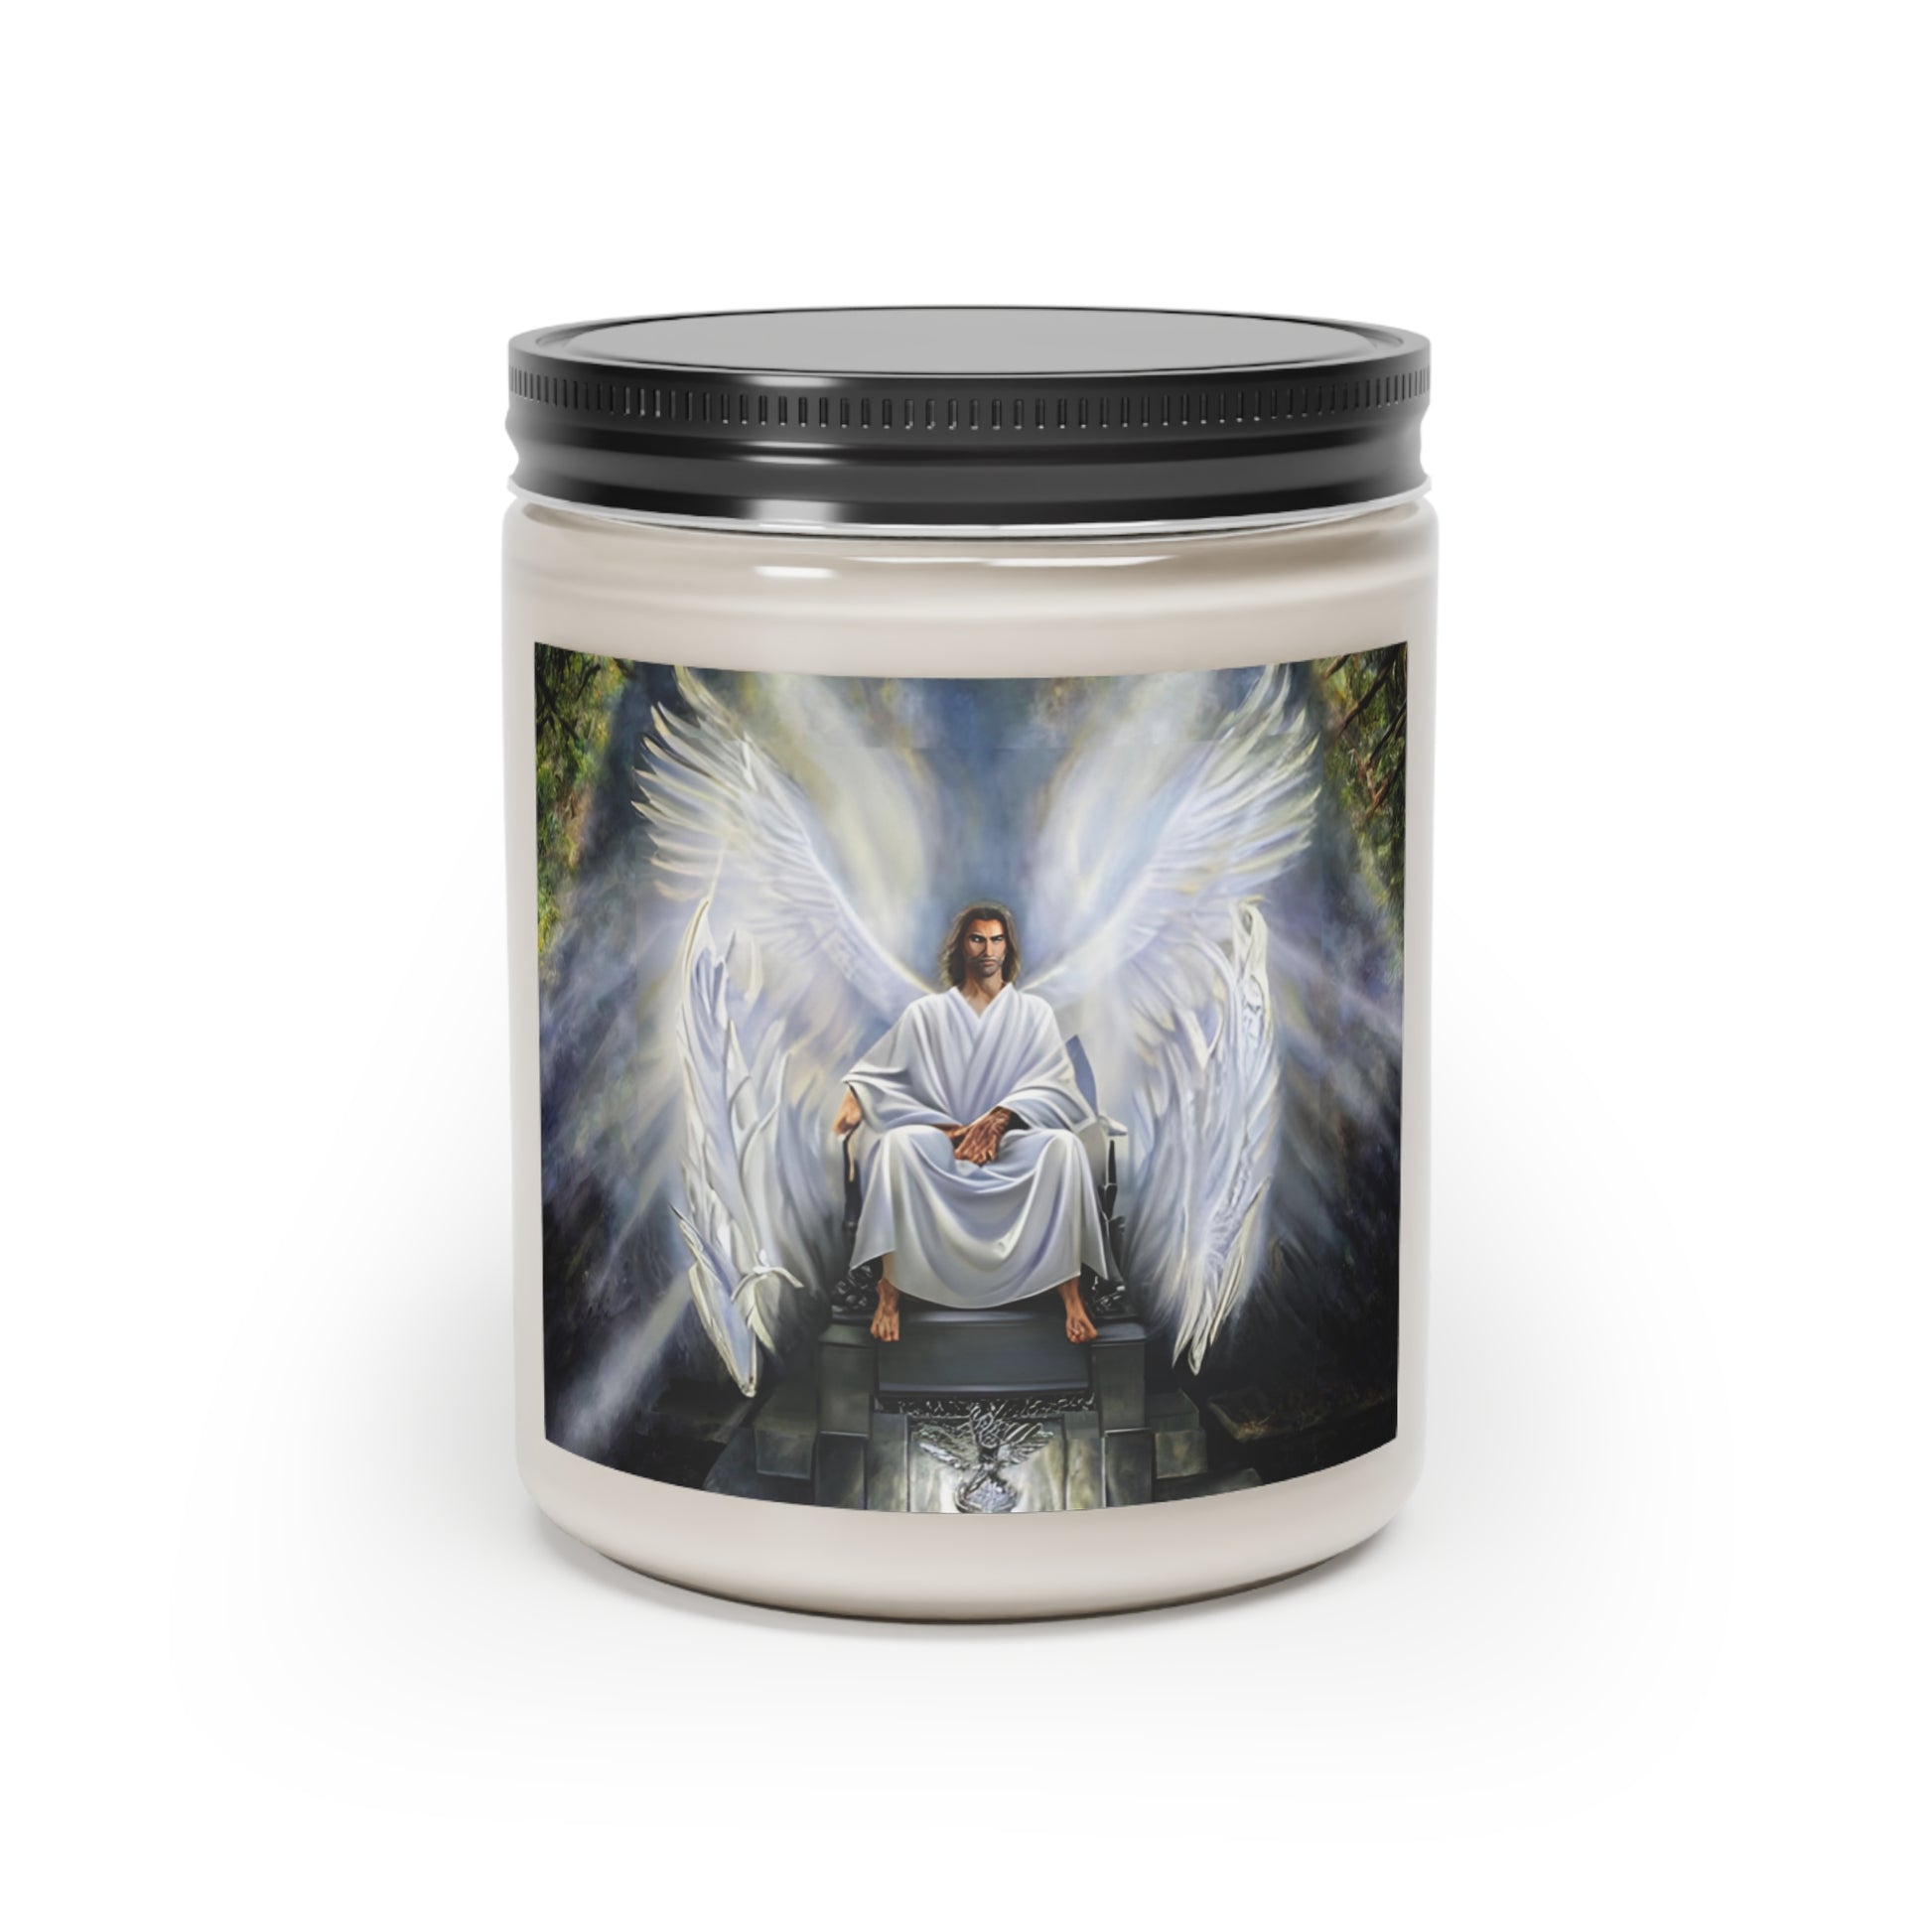 Archangel Samael Scented Candle for offerings, rituals, initiations or praying and meditation - Angelic Thrones: Your Gateway to the Angelic Realms